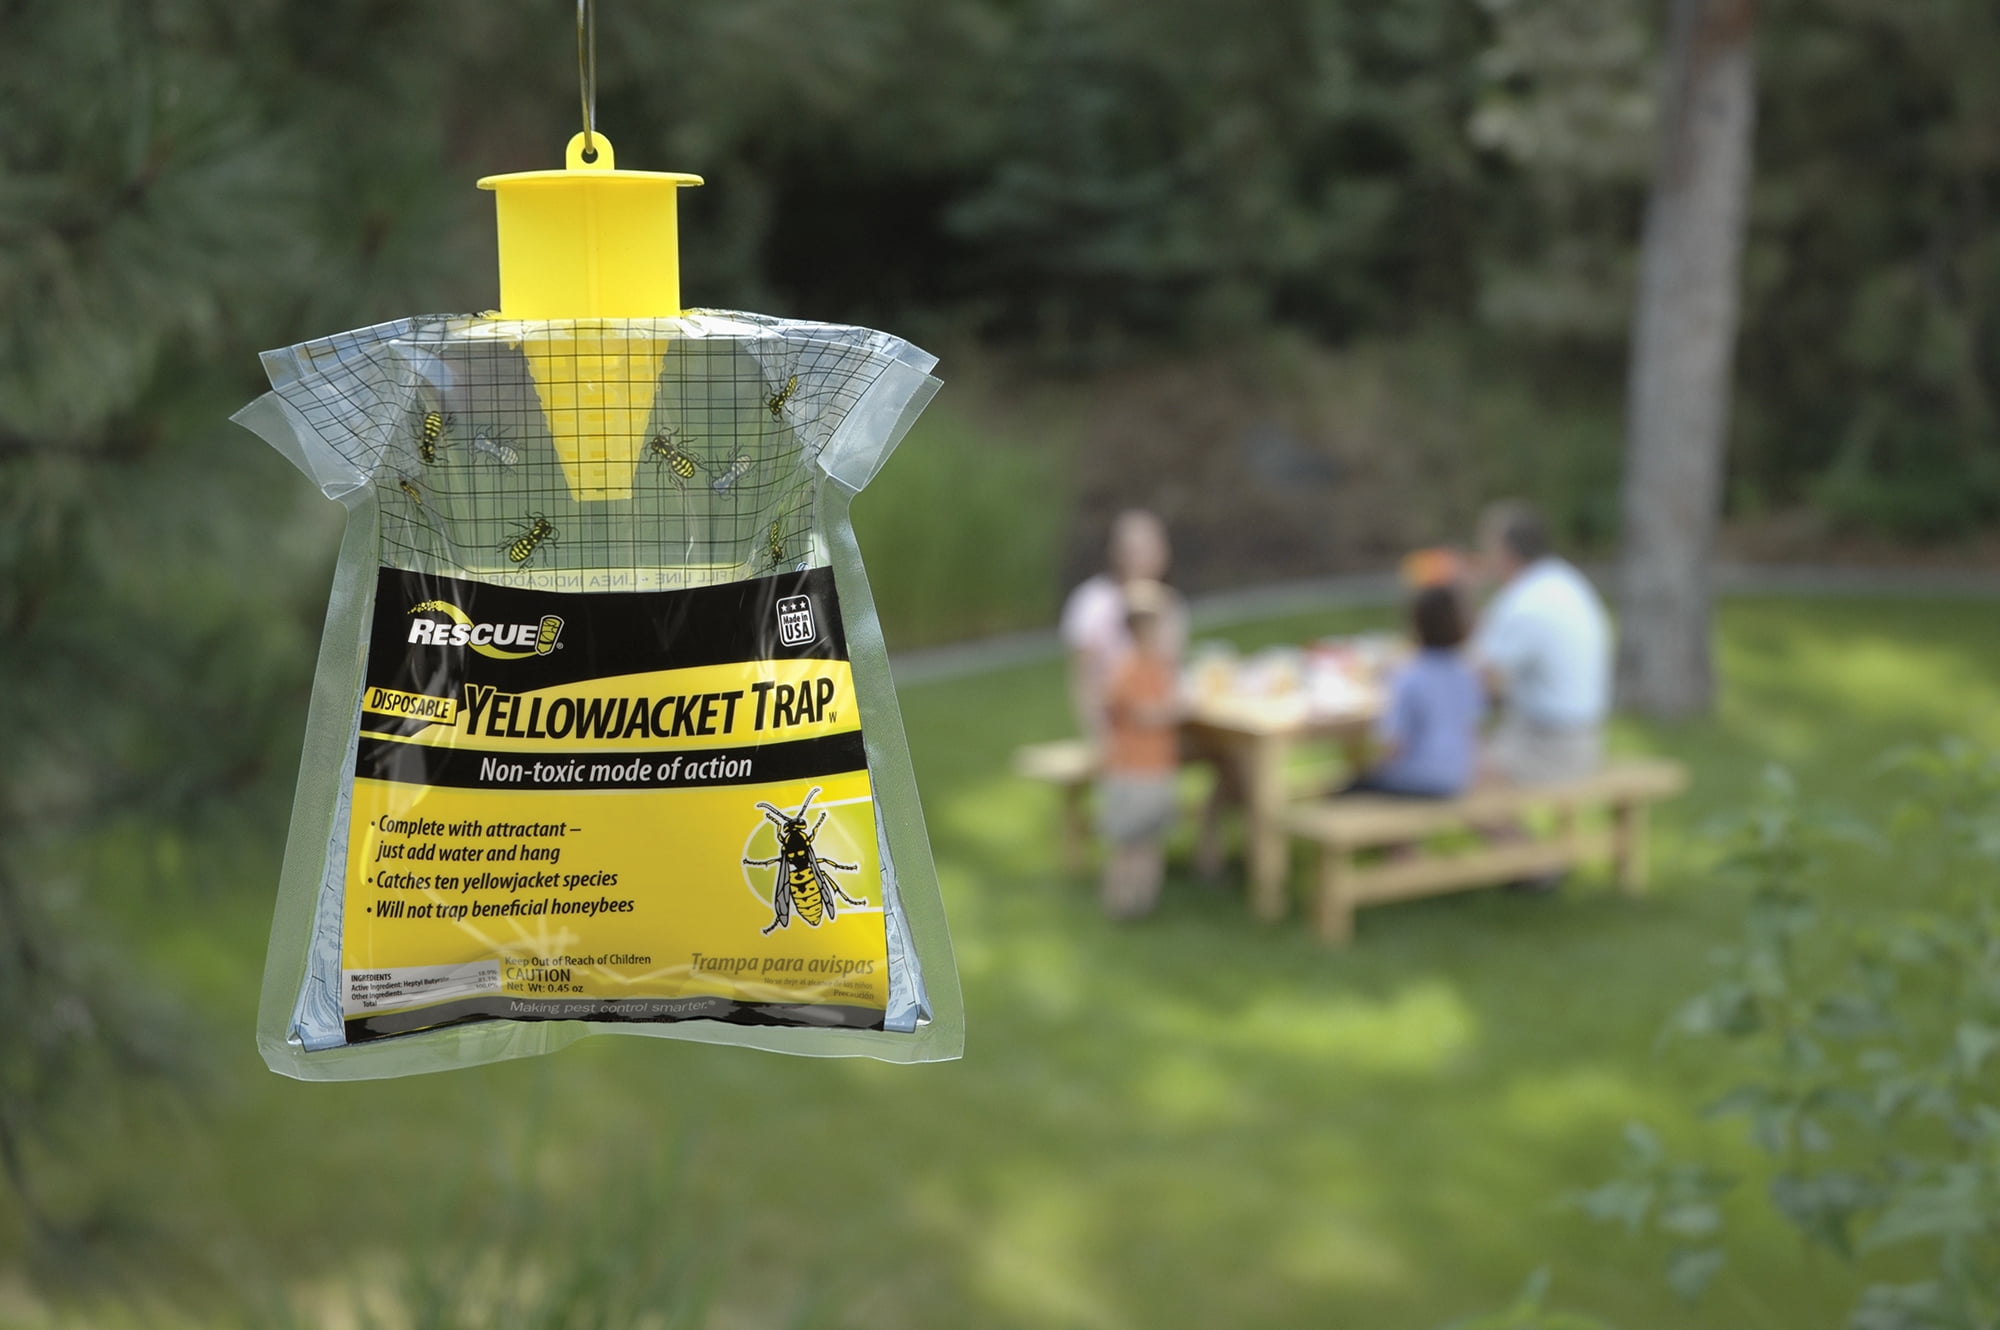 Designed For Western U.S.A. Non-Toxic Powdered Attractant Catches Multiple Species Pack of 6 Last For Weeks For Outdoor Activities In Summar and Fall Rescue YJTD-W Disposable Yellowjacket Trap 